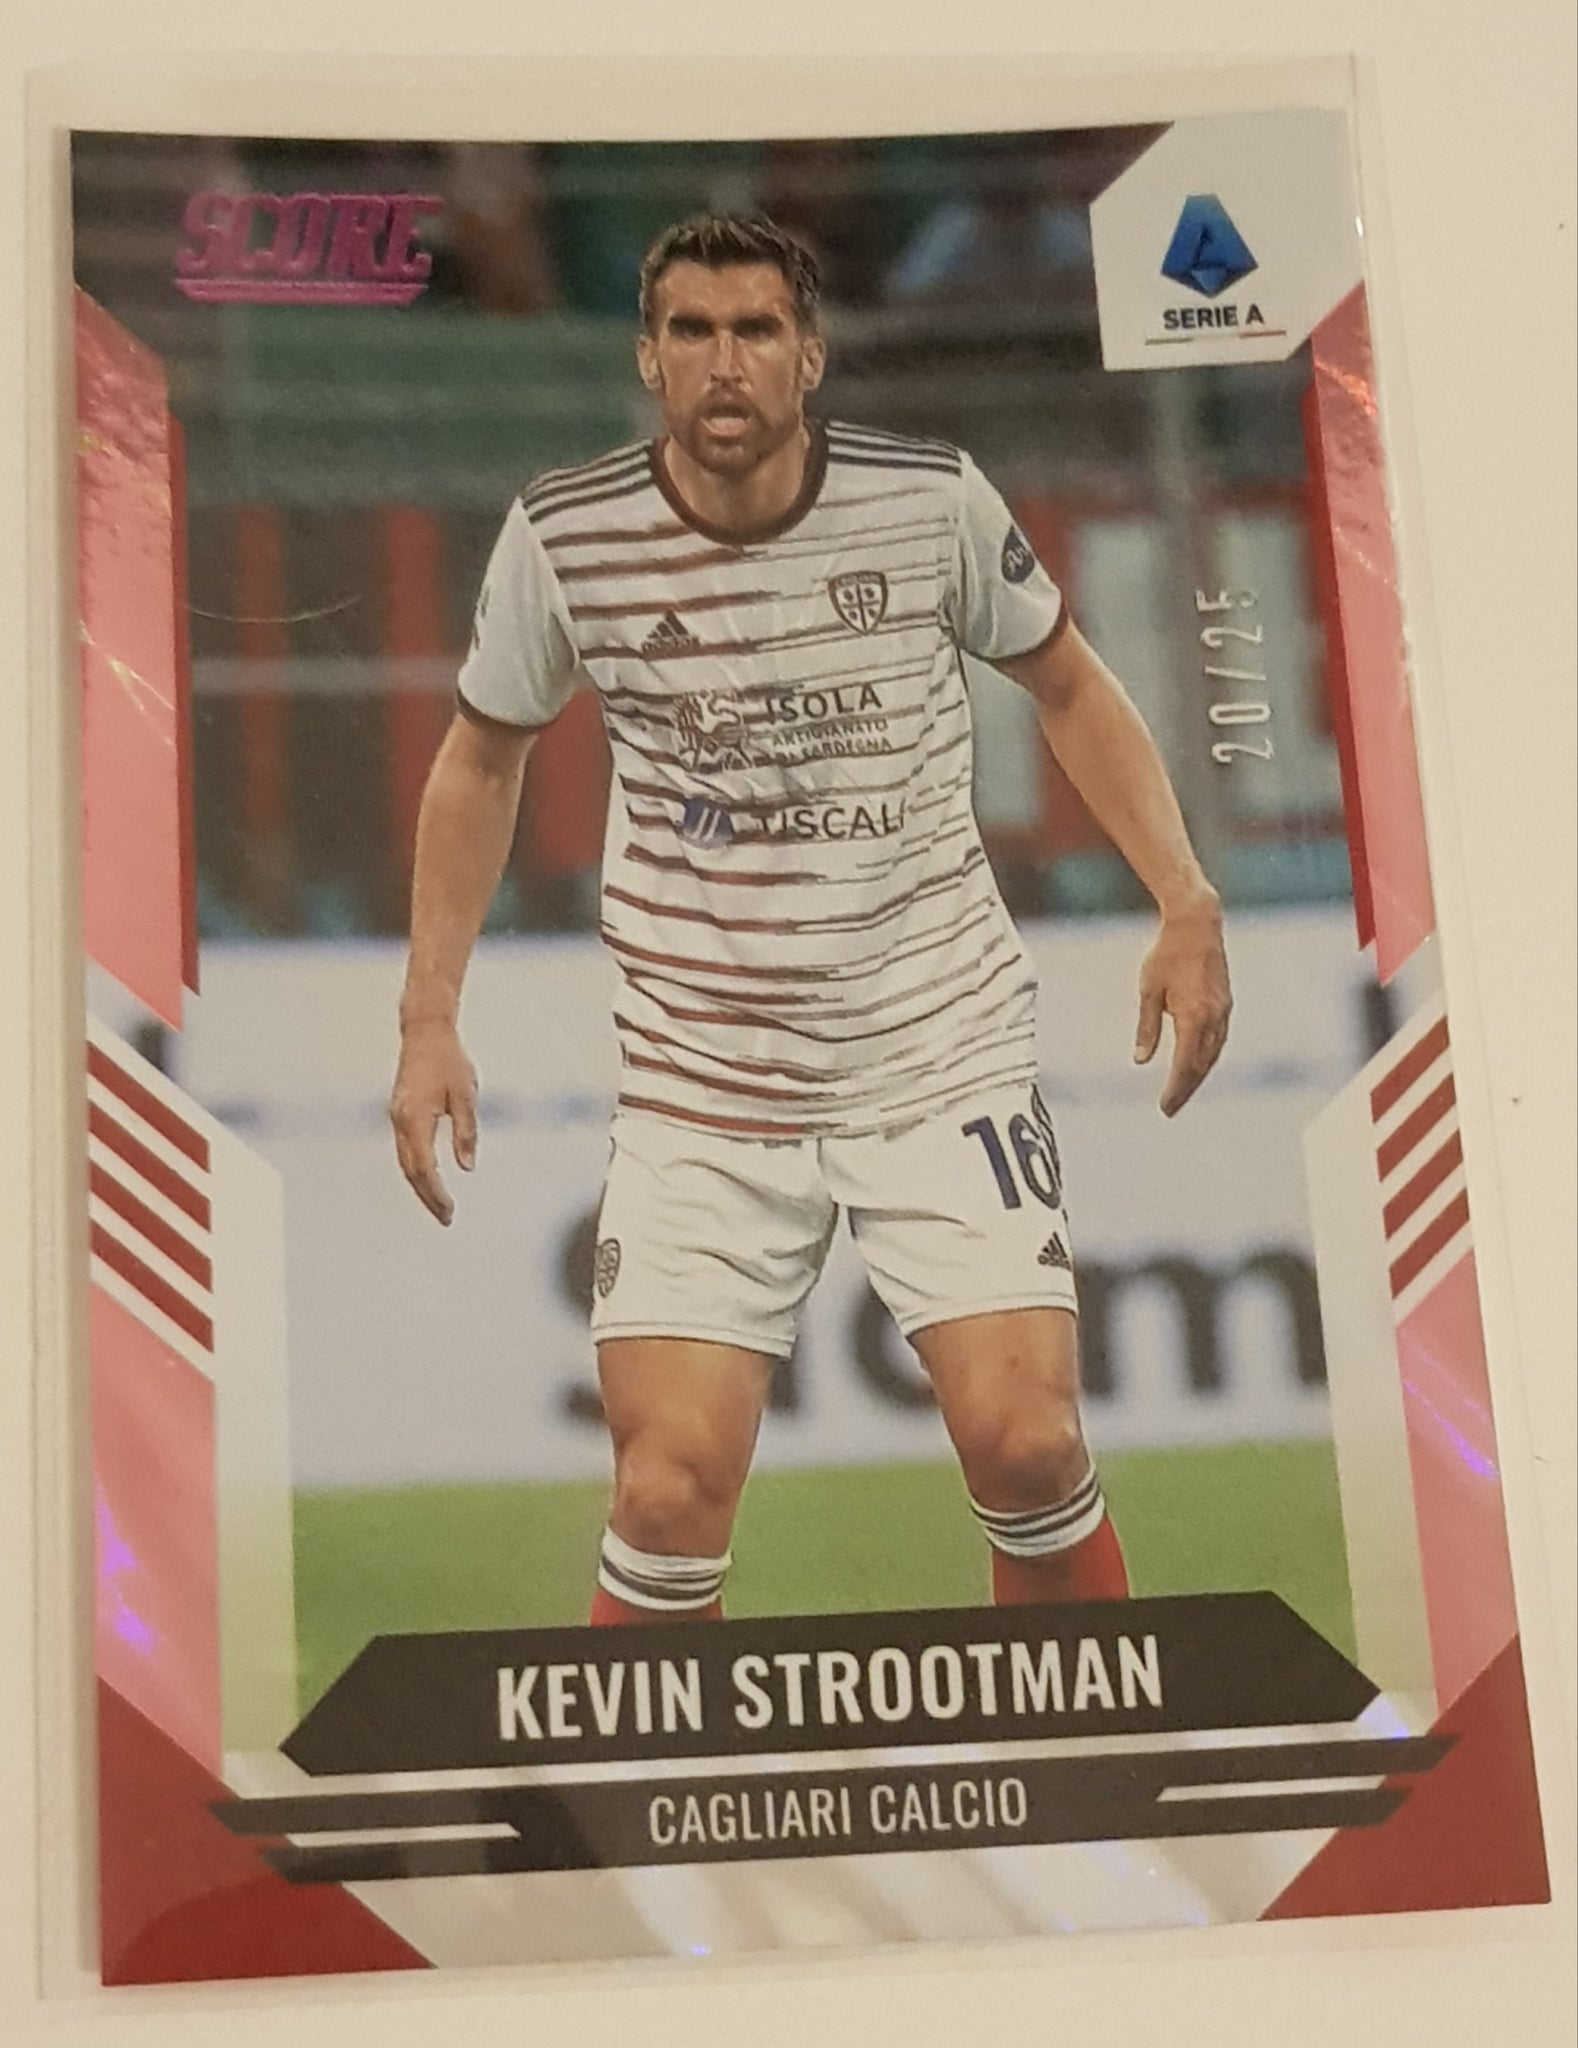 2021-22 Panini Score Serie A Kevin Strootman #99 Pink Lava Parallel /25 Trading Card